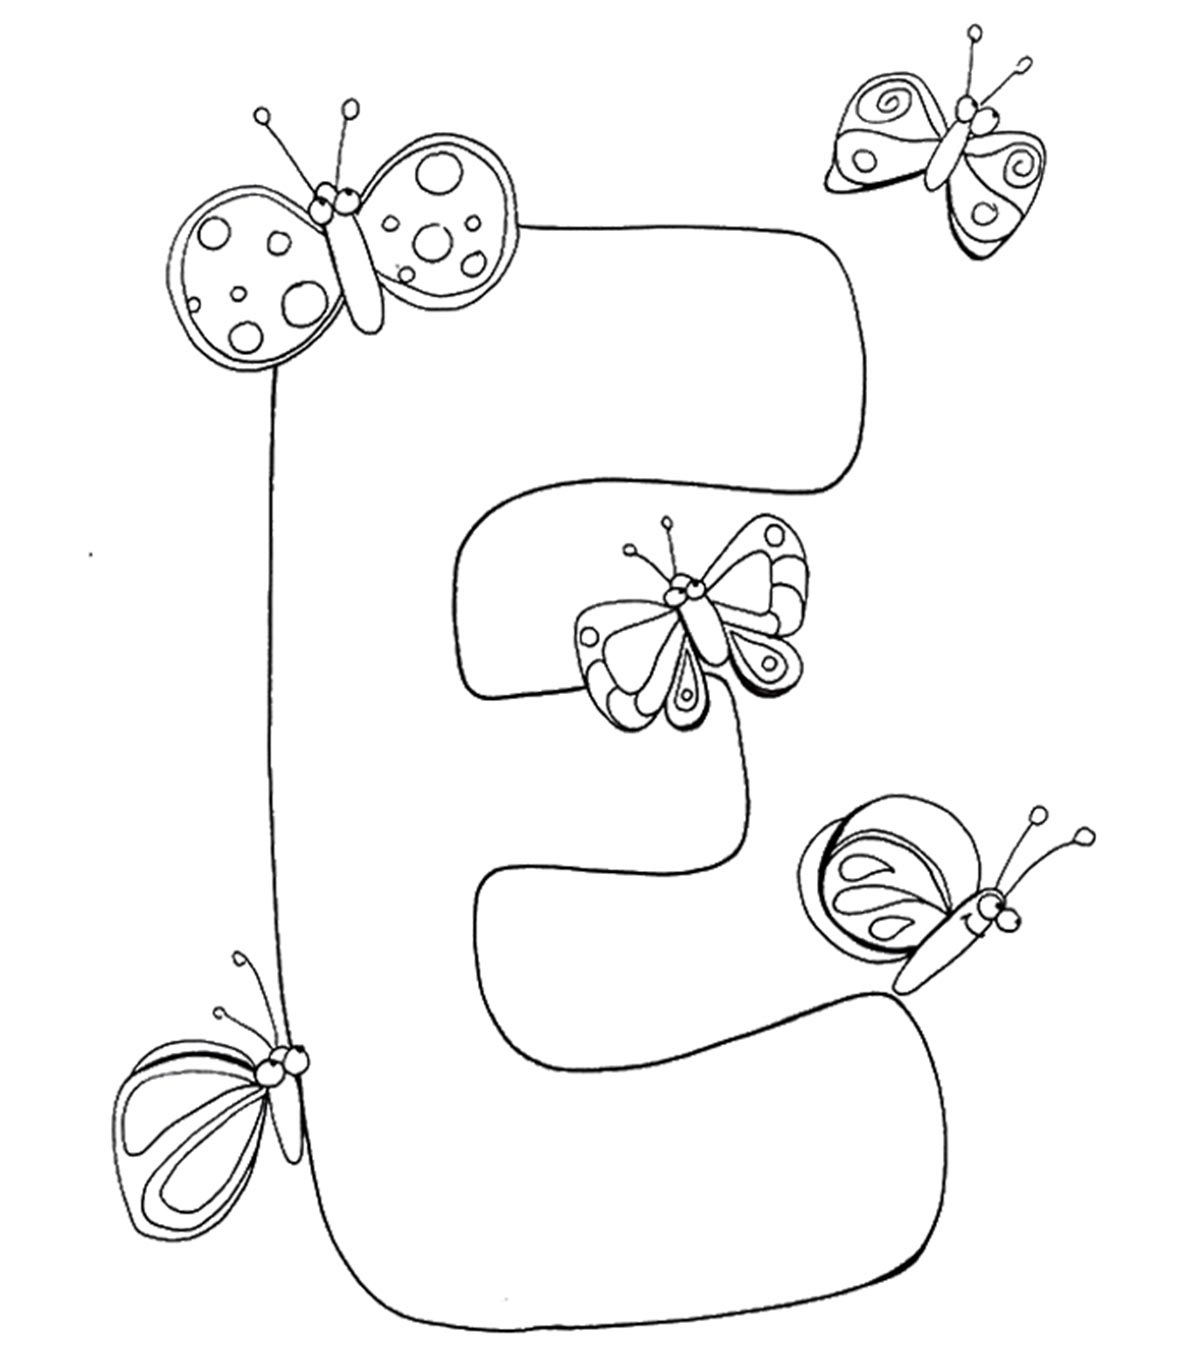 Colors Coloring Pages Top 10 Free Printable Letter E Coloring Pages Online